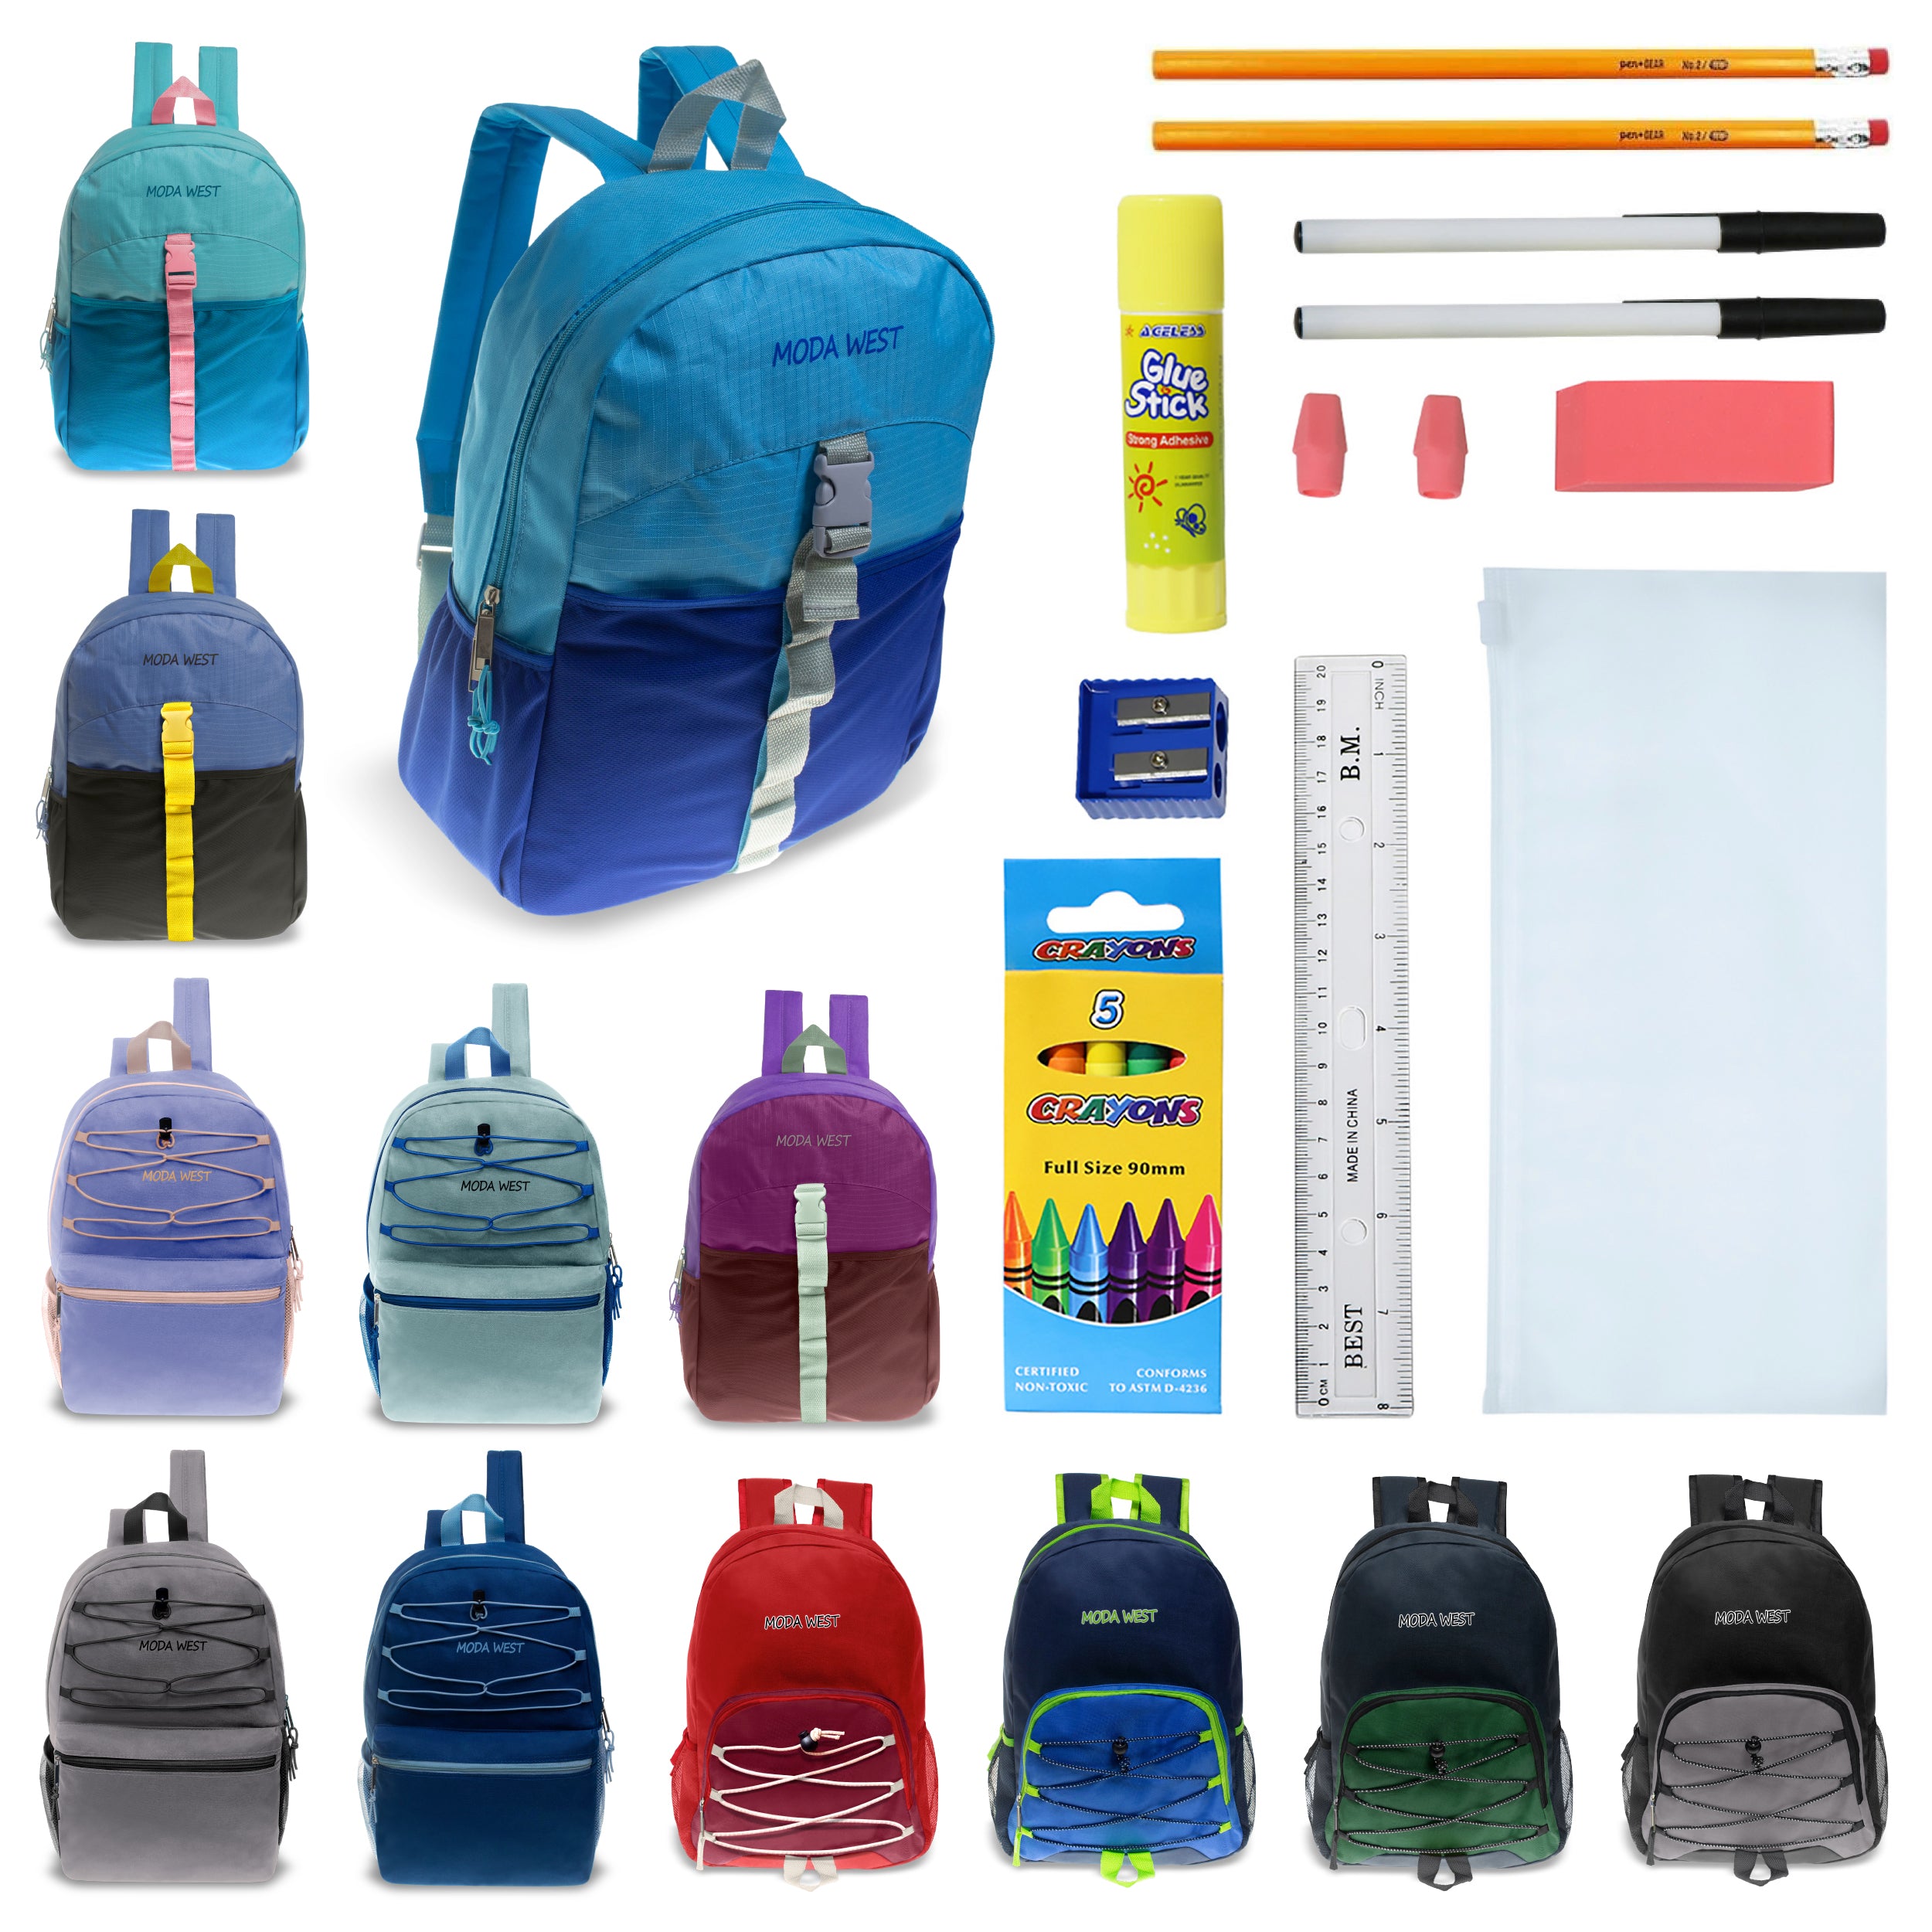 17 Inch Wholesale Backpacks in Assorted Colors with School Supply Kits Bulk - Case of 12